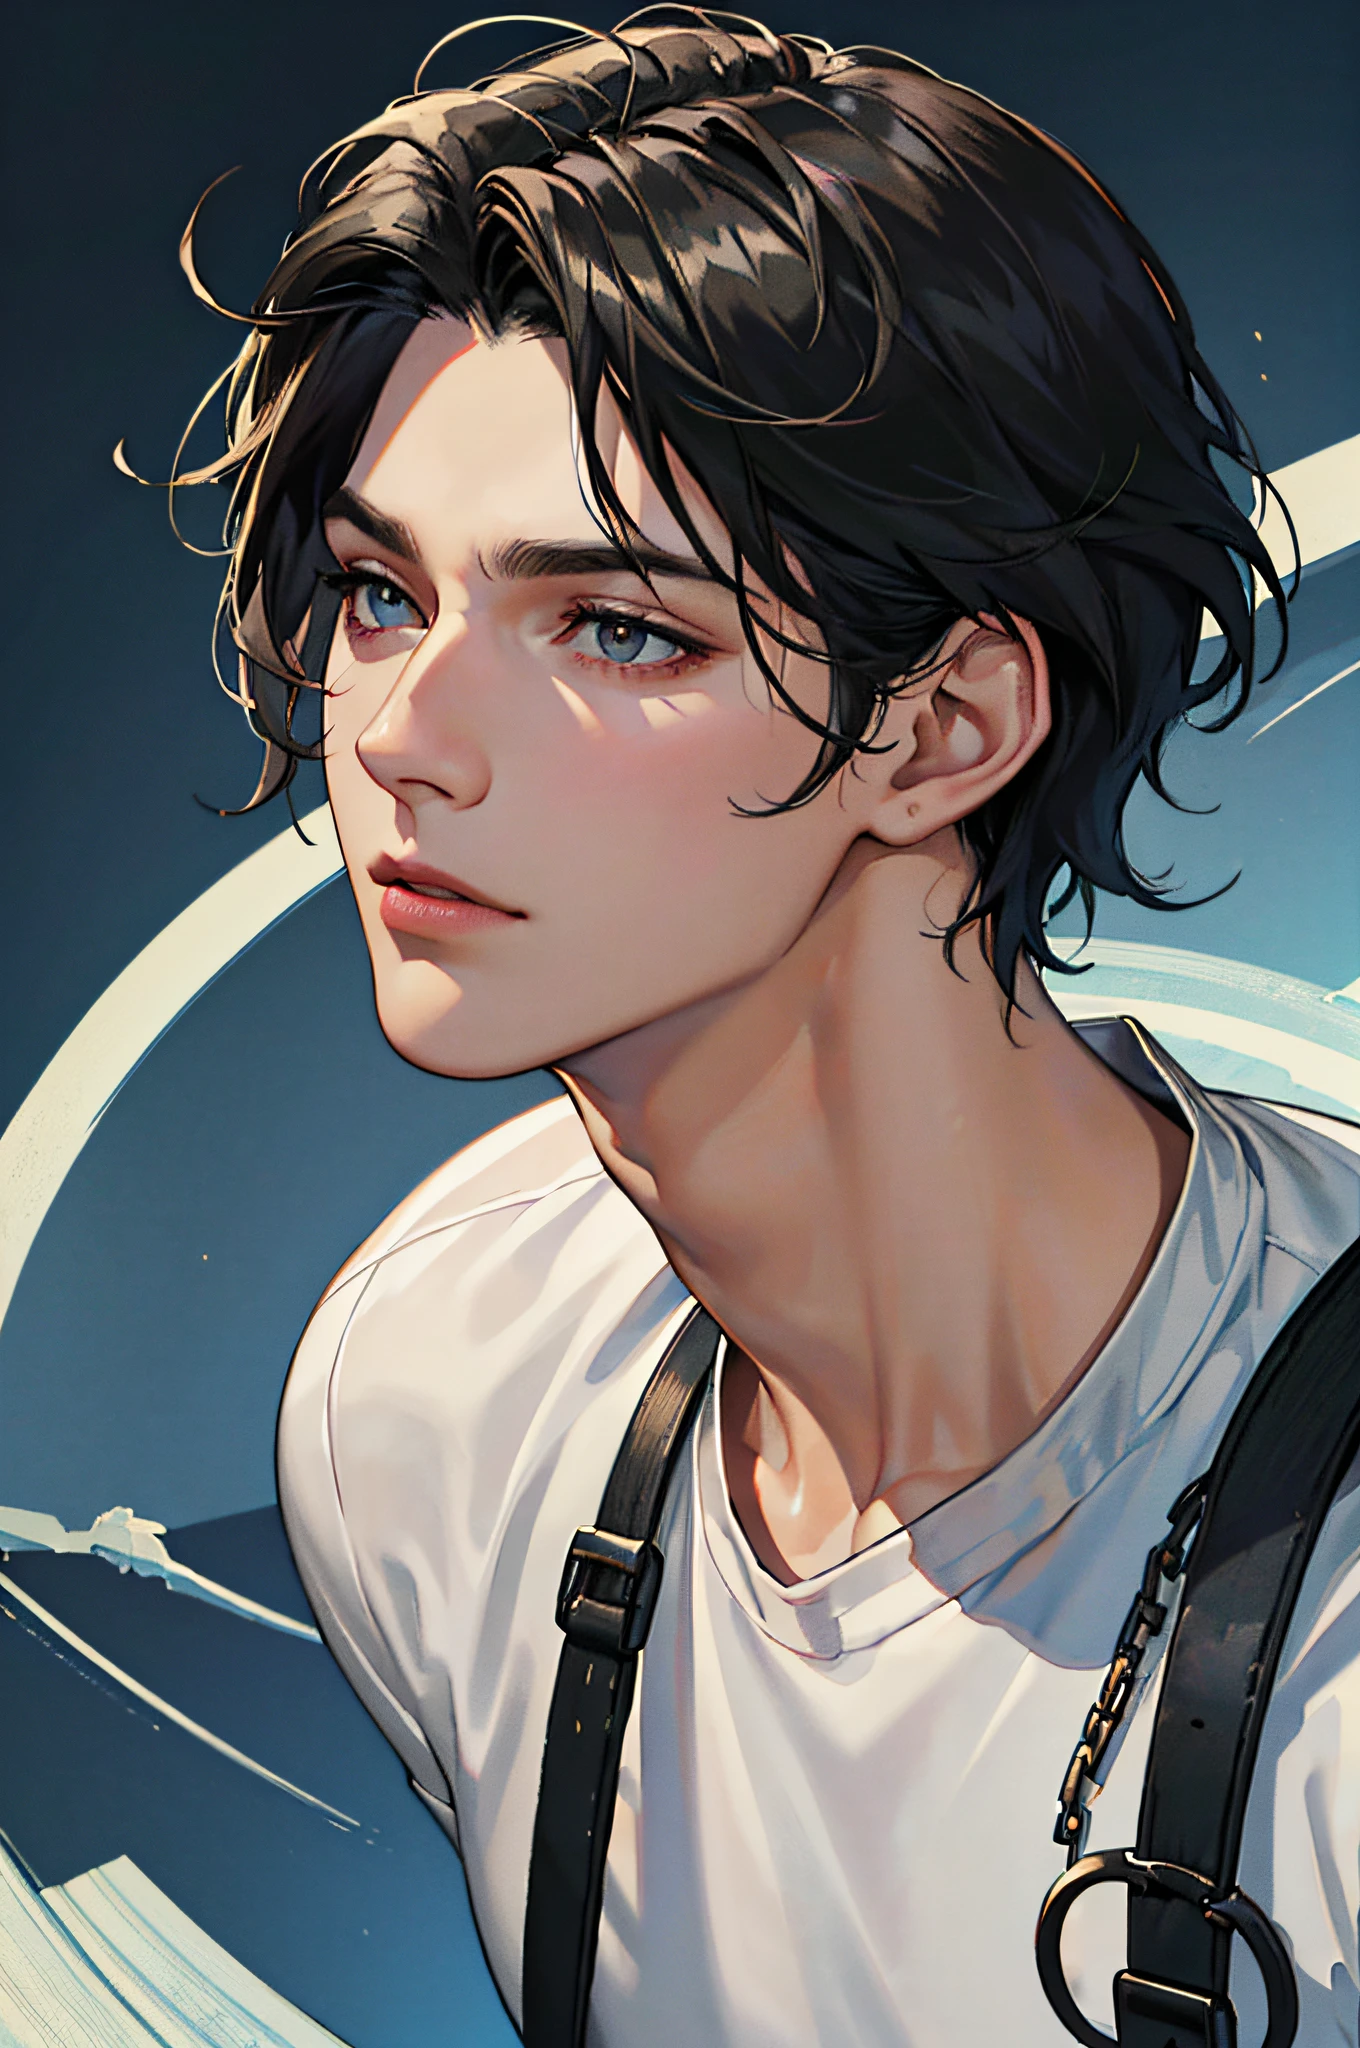 8k wallpaper, super detailed, beautiful, masterpiece, best quality, 1 adult young male, black hair, short hair, flowing short bangs, delicate jawline, dan phoenix eyes, high nose, jacket top, white t-shirt bottom, cargo pants, normal dress, ear chain in one ear, dark atmosphere